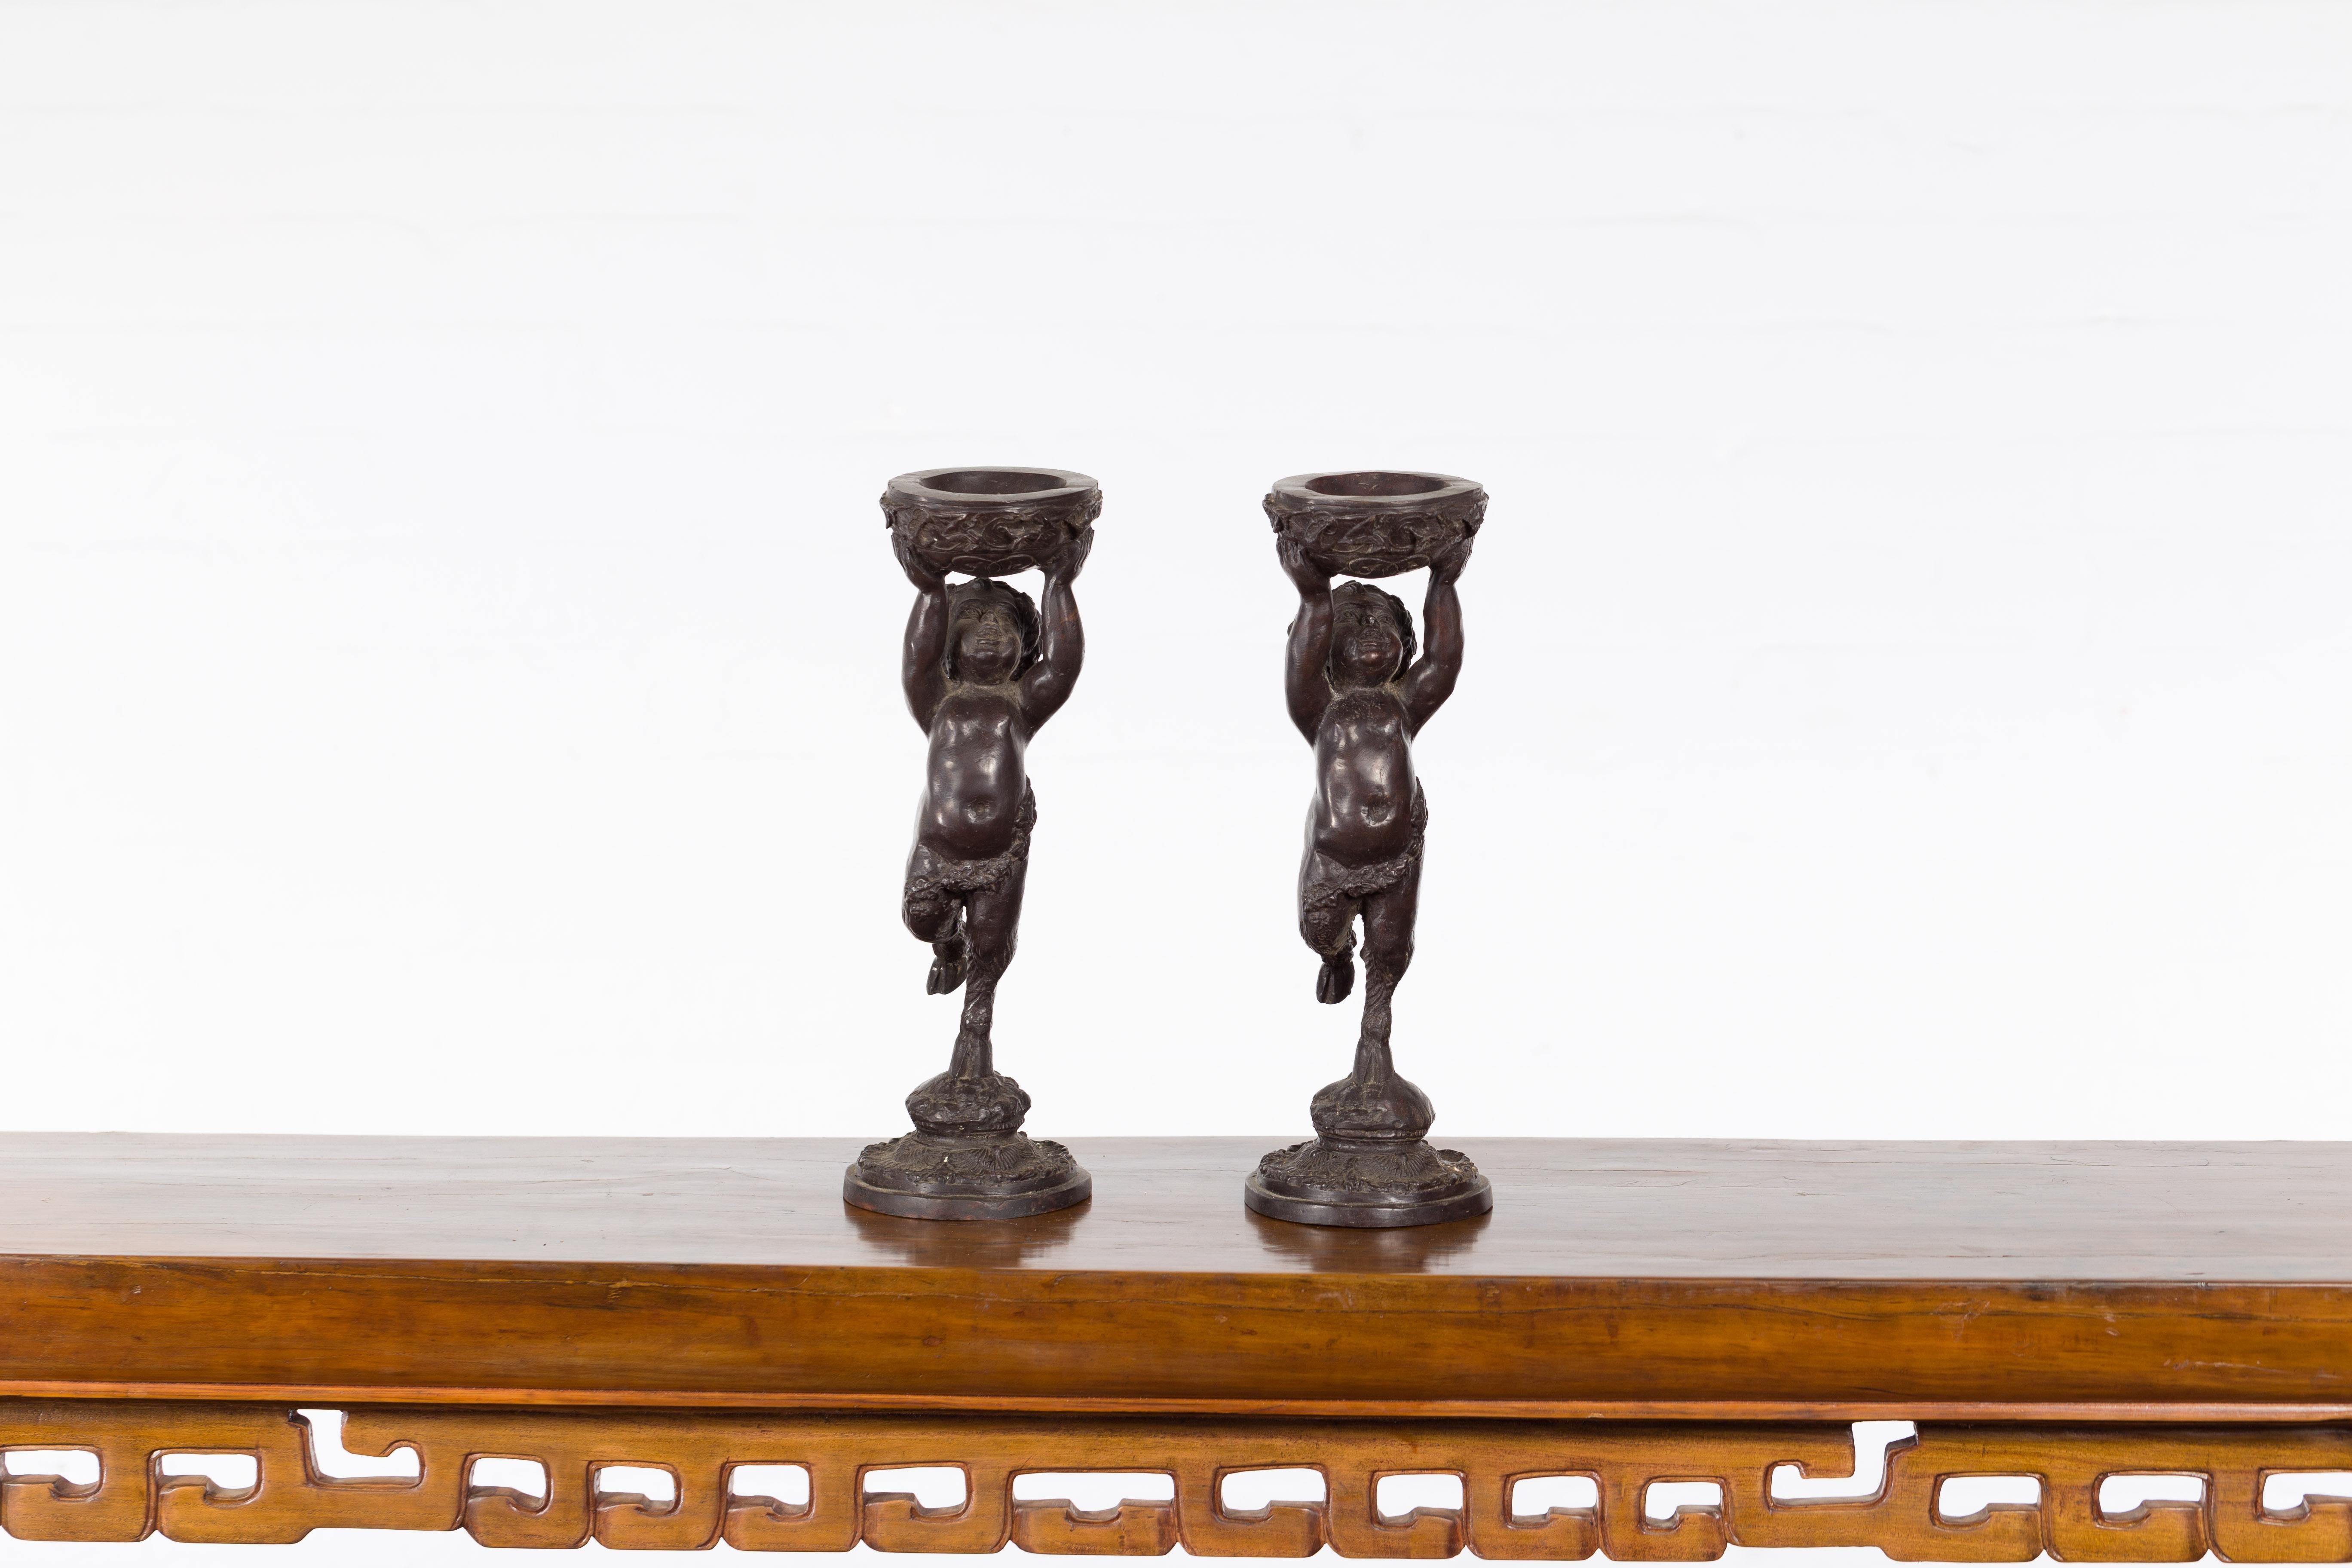 A pair of Greco-Roman style vintage bronze young satyr candle holders from the mid 20th century, holding circular vessels. Created with the traditional technique of the lost-wax (à la cire perdue) which allows for great precision and finesse in the